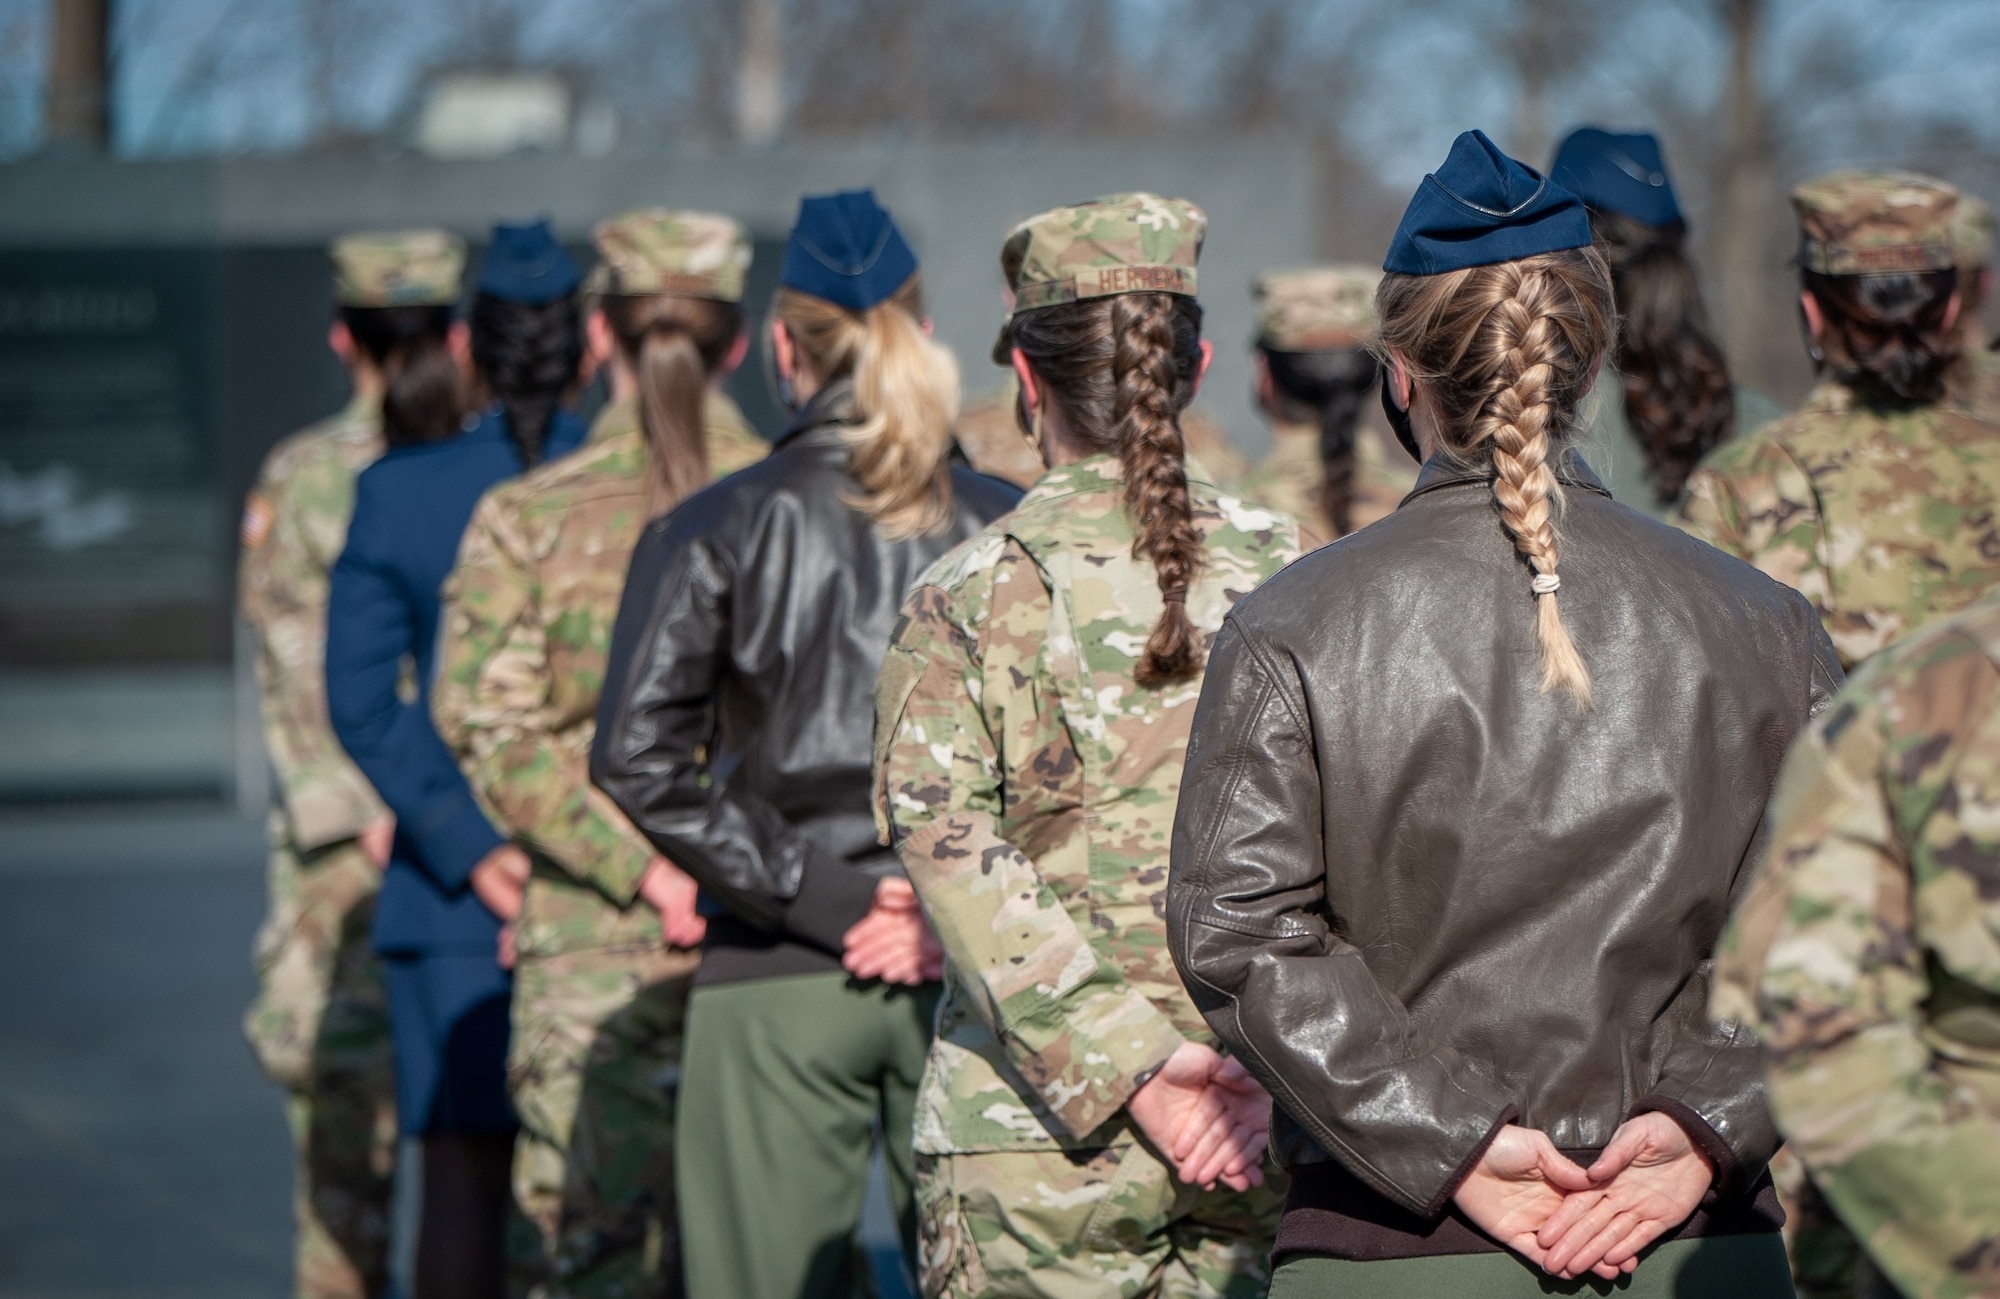 Contributions to the 101st Air Force uniform board have led to the first major hair policy change for Air Force women since the late 1940s